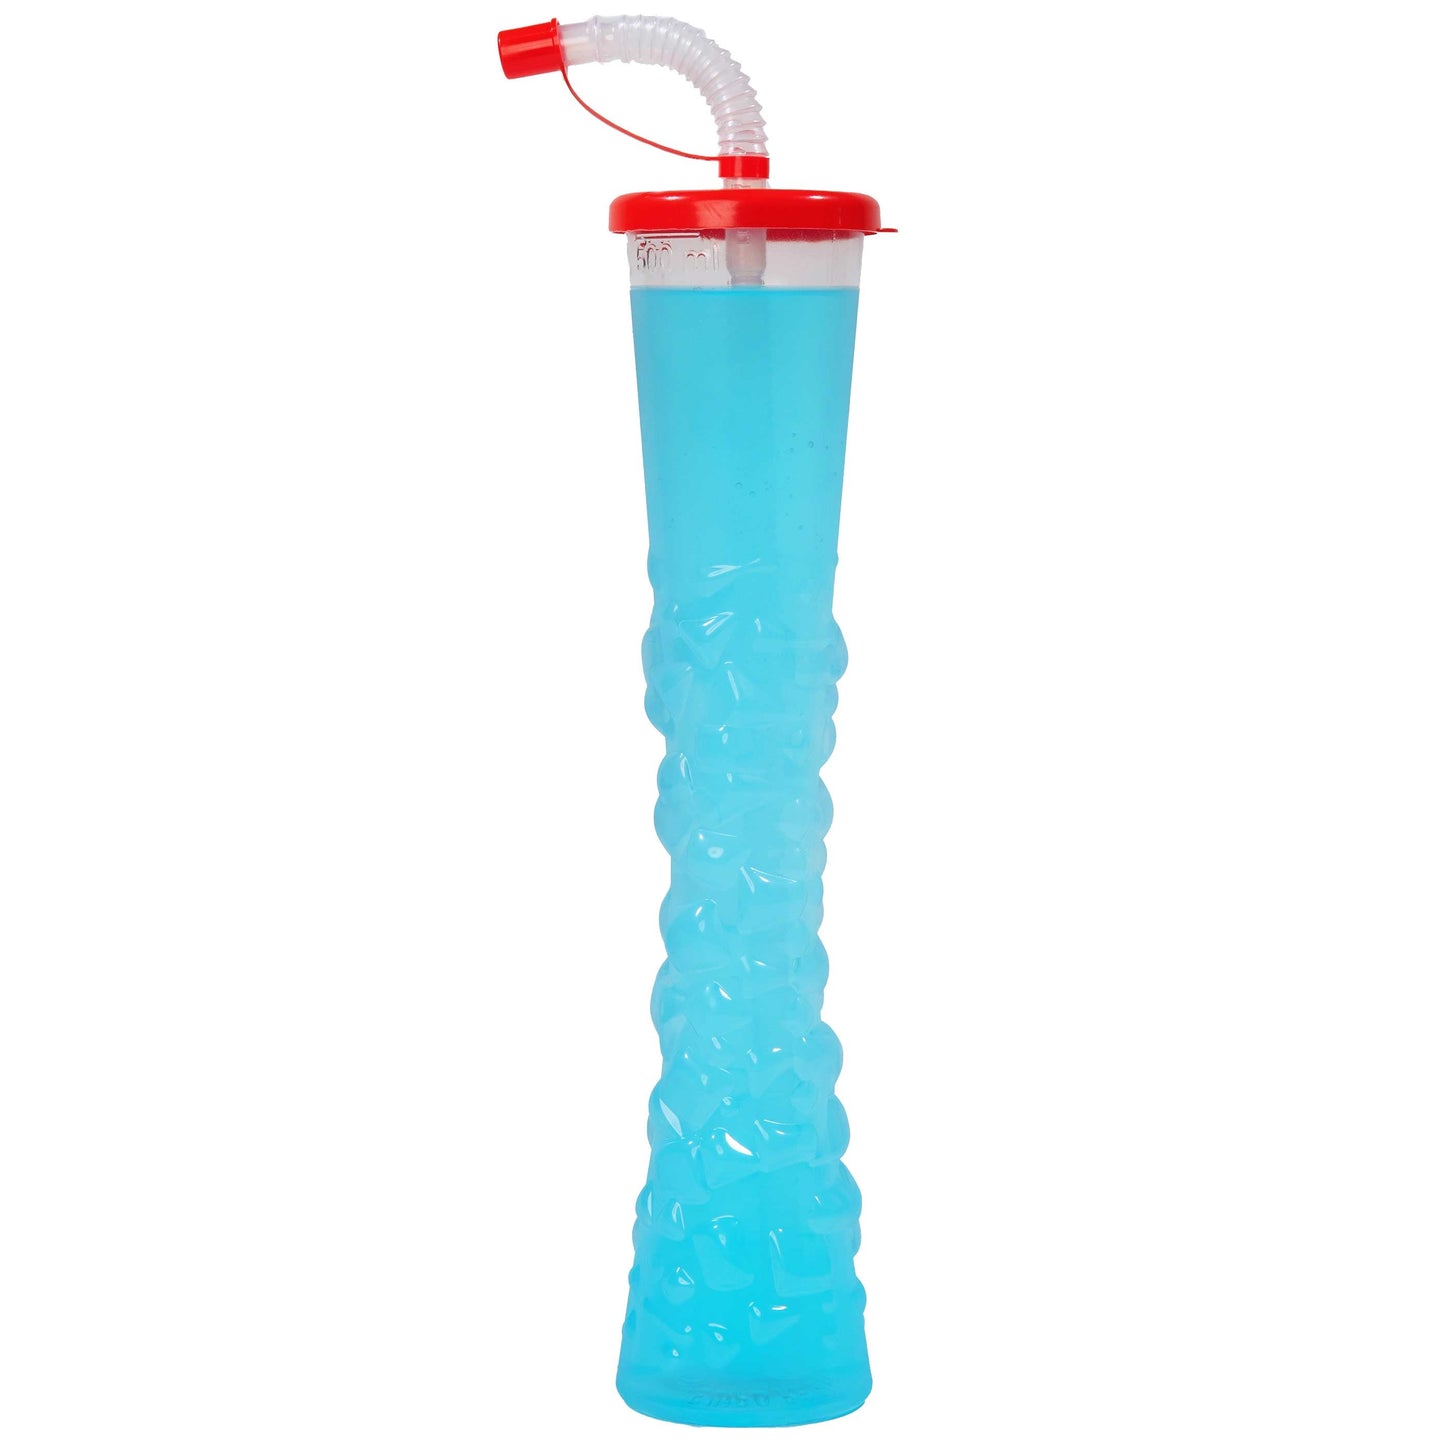 Sweet World USA Yard Cups Ice Yard Cups (54 Cups - Red) - for Margaritas and Frozen Drinks, Kids Parties - 17oz. (500ml) cups with lids and straws